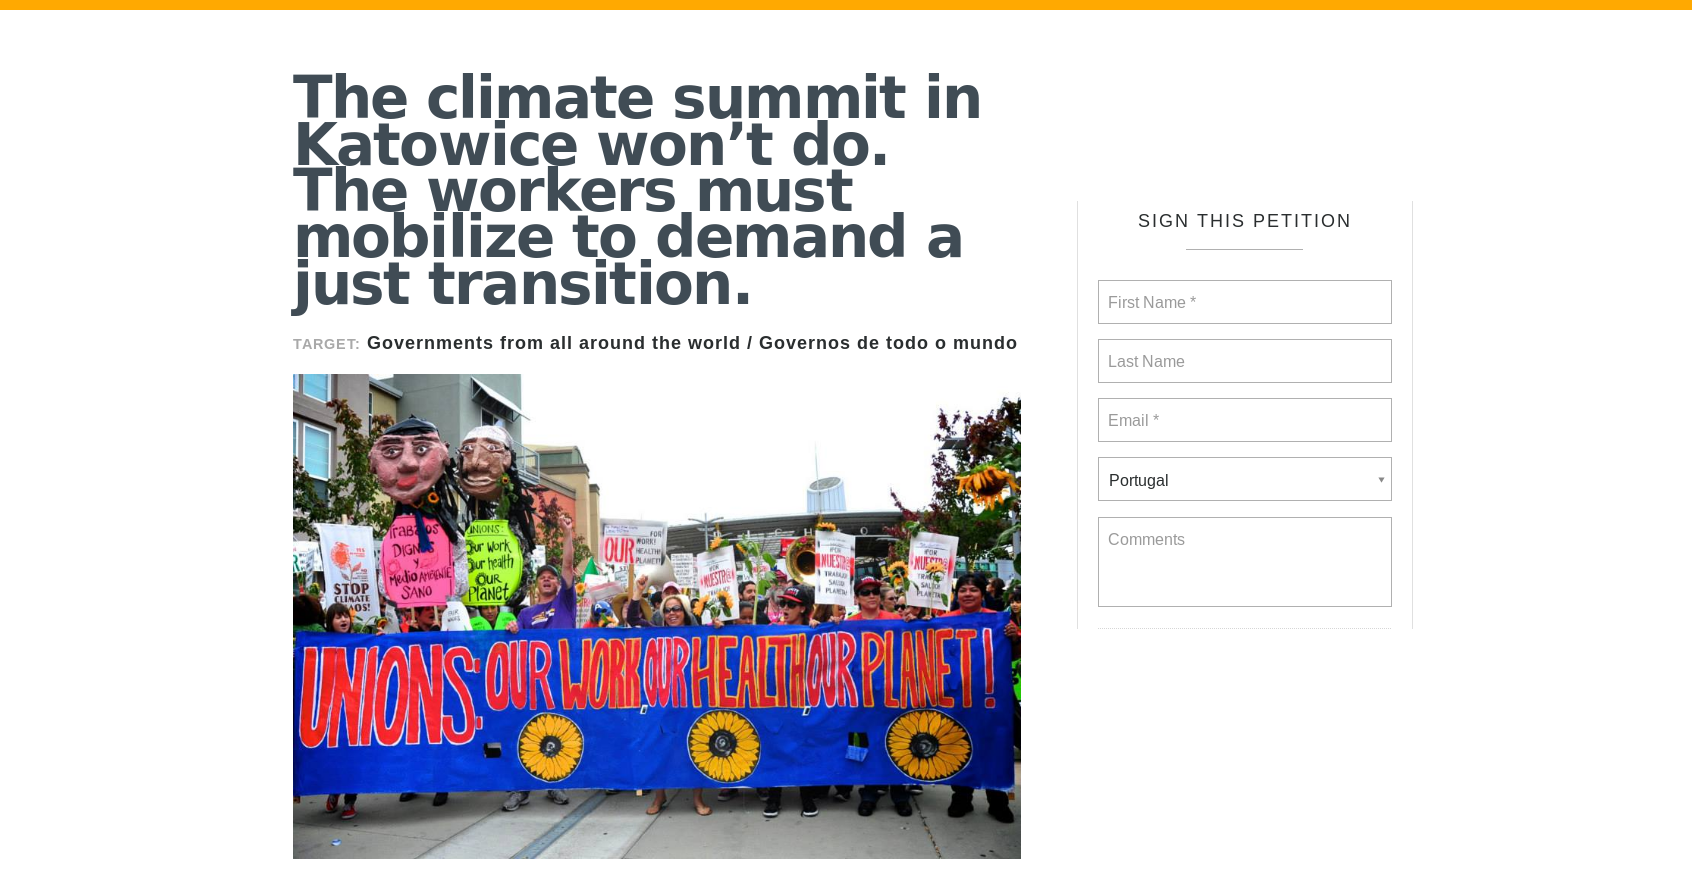 Vídeo: The climate summit in Katowice won’t do. The workers must mobilize to demand a just transition.